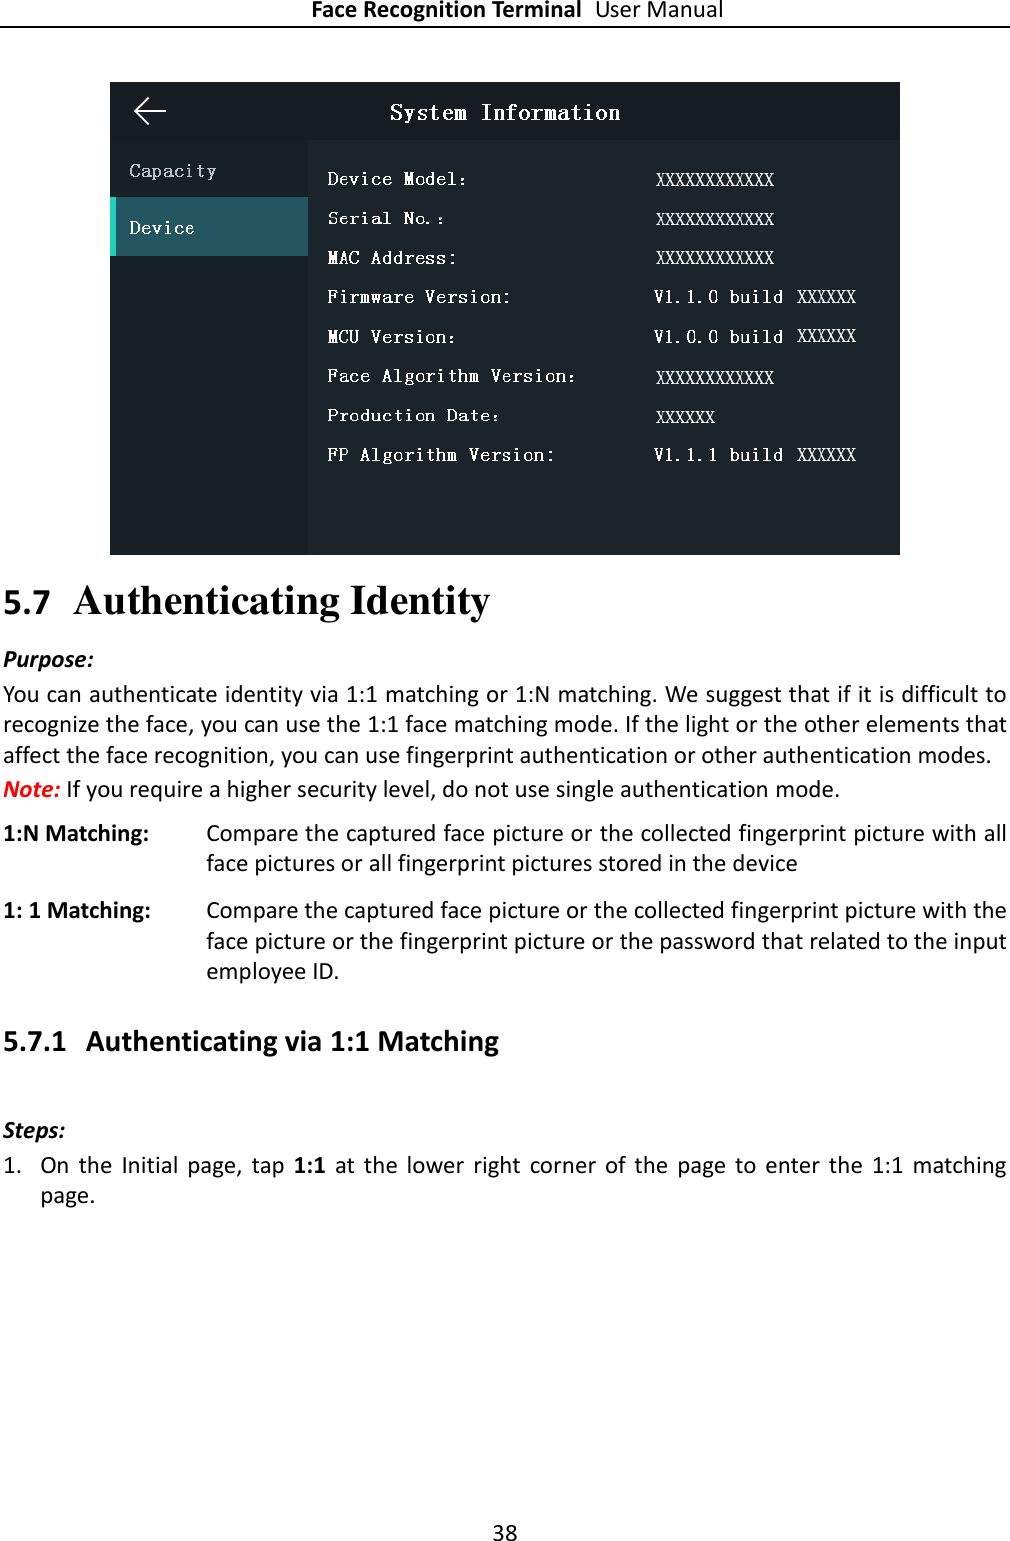 Face Recognition Terminal User Manual 38   5.7 Authenticating Identity Purpose: You can authenticate identity via 1:1 matching or 1:N matching. We suggest that if it is difficult to recognize the face, you can use the 1:1 face matching mode. If the light or the other elements that affect the face recognition, you can use fingerprint authentication or other authentication modes. Note: If you require a higher security level, do not use single authentication mode. 1:N Matching: Compare the captured face picture or the collected fingerprint picture with all face pictures or all fingerprint pictures stored in the device 1: 1 Matching: Compare the captured face picture or the collected fingerprint picture with the face picture or the fingerprint picture or the password that related to the input employee ID. 5.7.1 Authenticating via 1:1 Matching Steps:   1. On  the  Initial  page,  tap  1:1  at  the  lower  right  corner  of  the  page  to  enter the  1:1  matching page. 